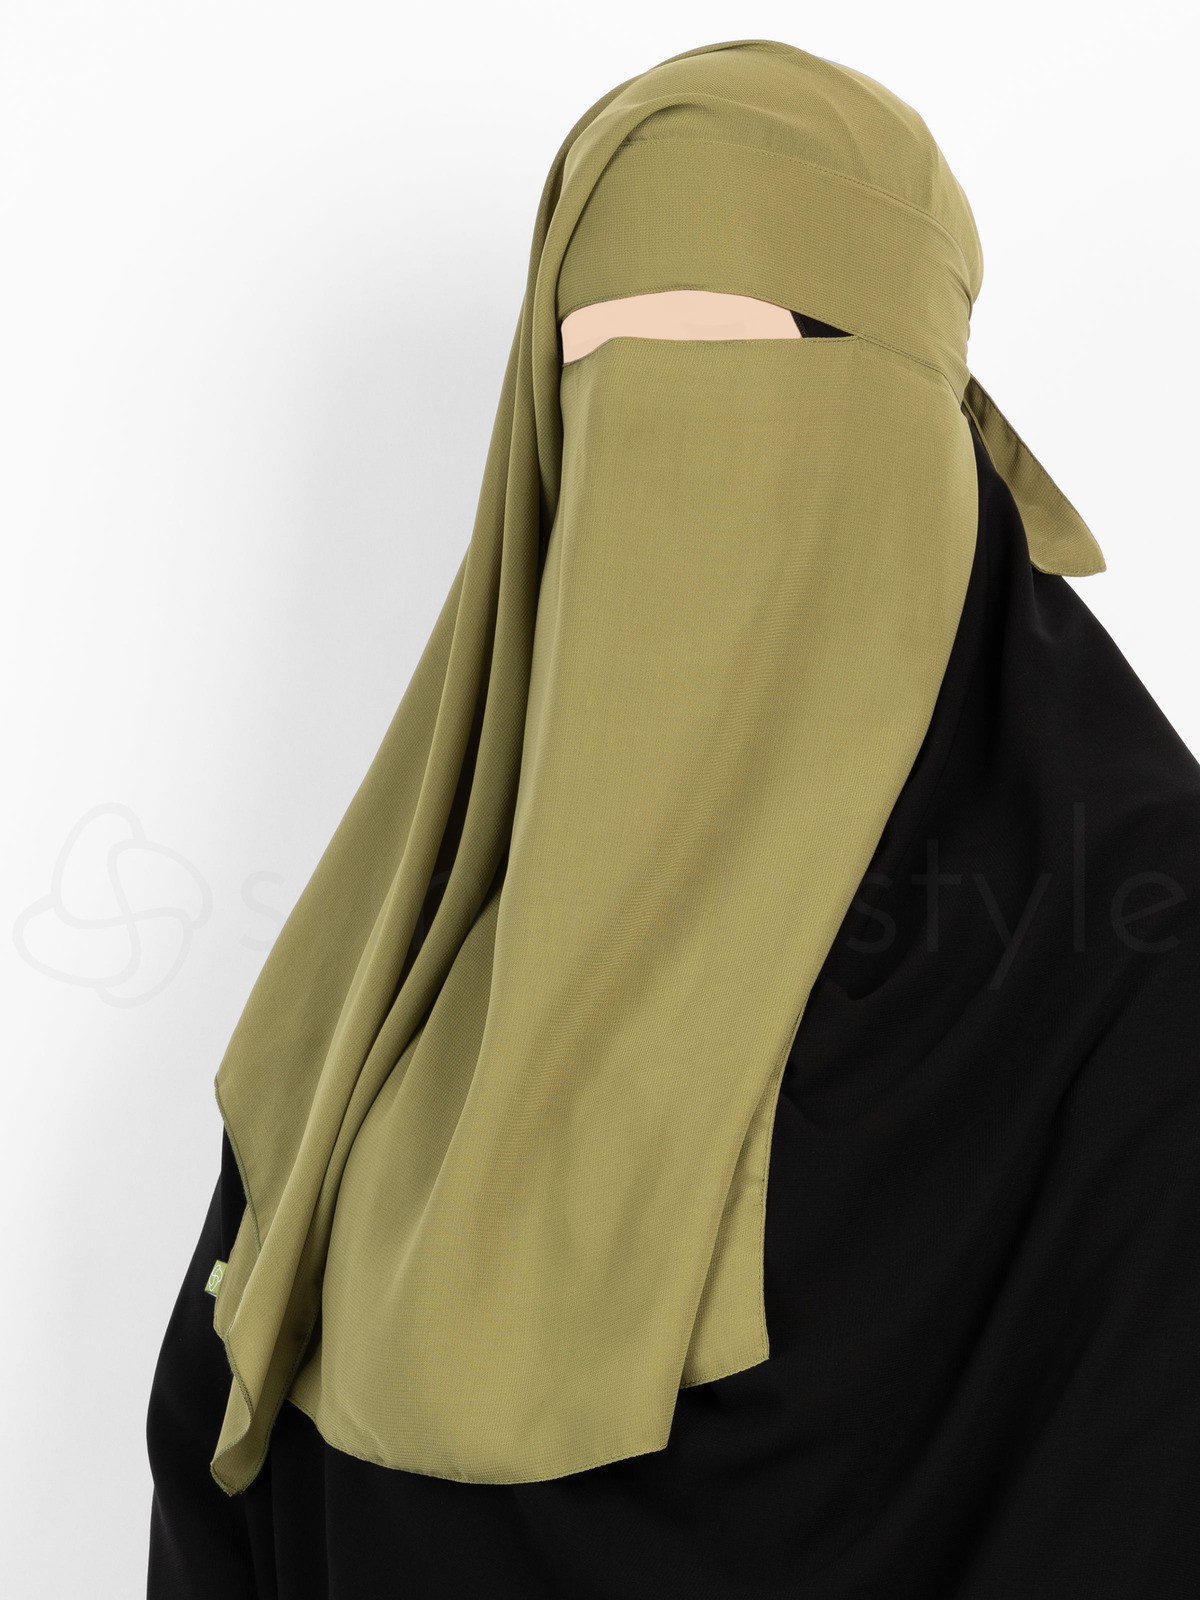 Sunnah Style - Two Layer Niqab (Moss)